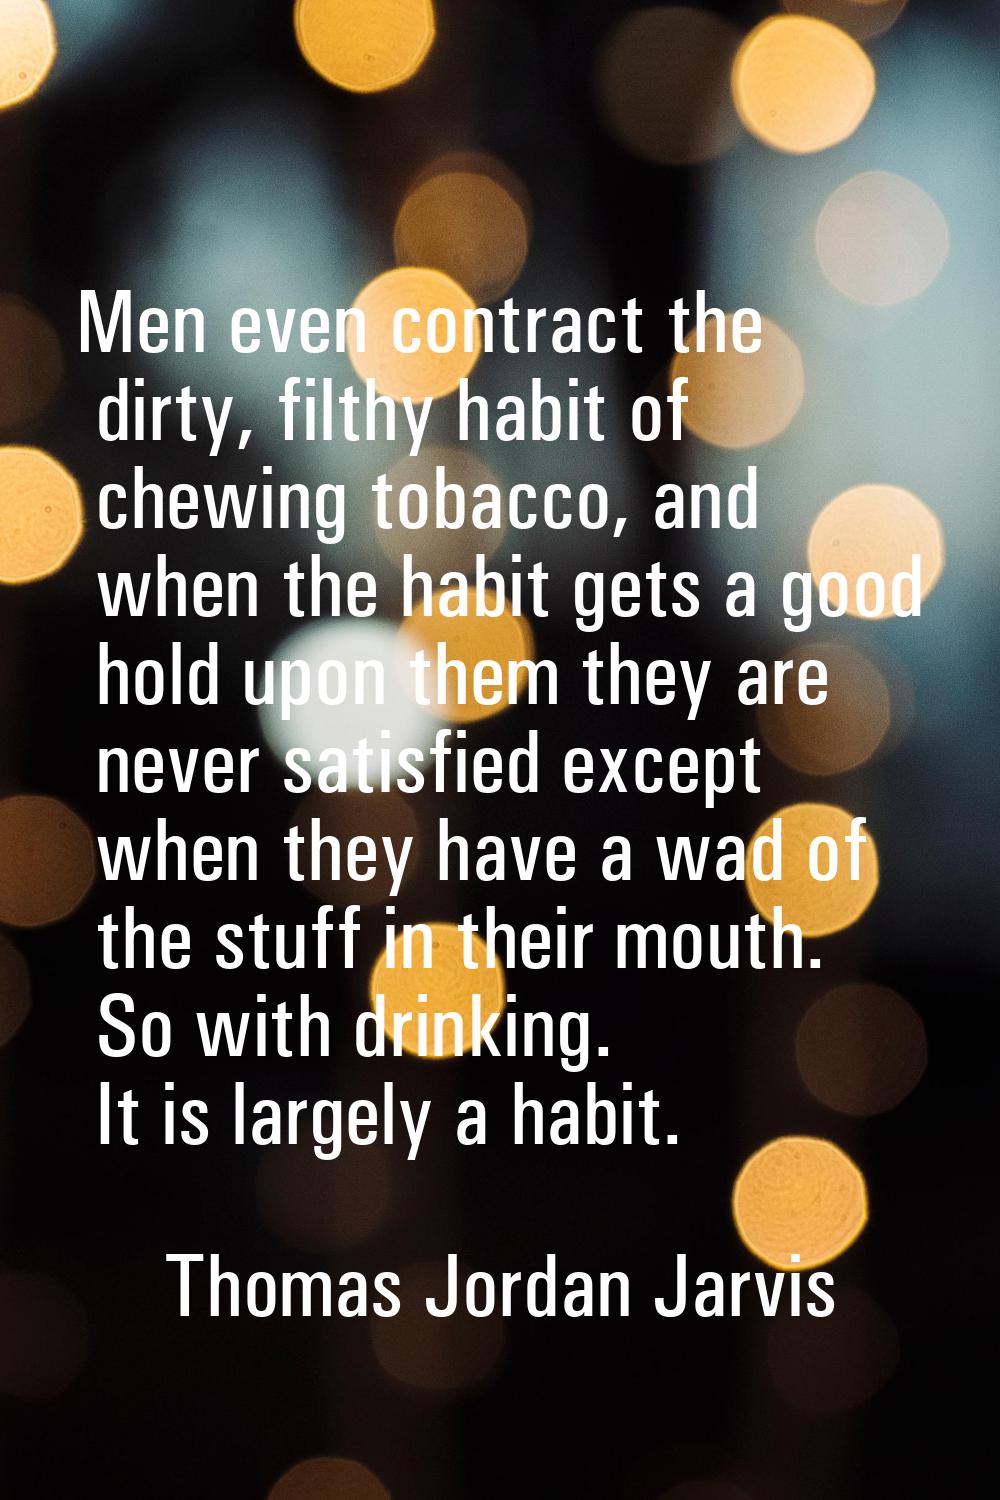 Men even contract the dirty, filthy habit of chewing tobacco, and when the habit gets a good hold u